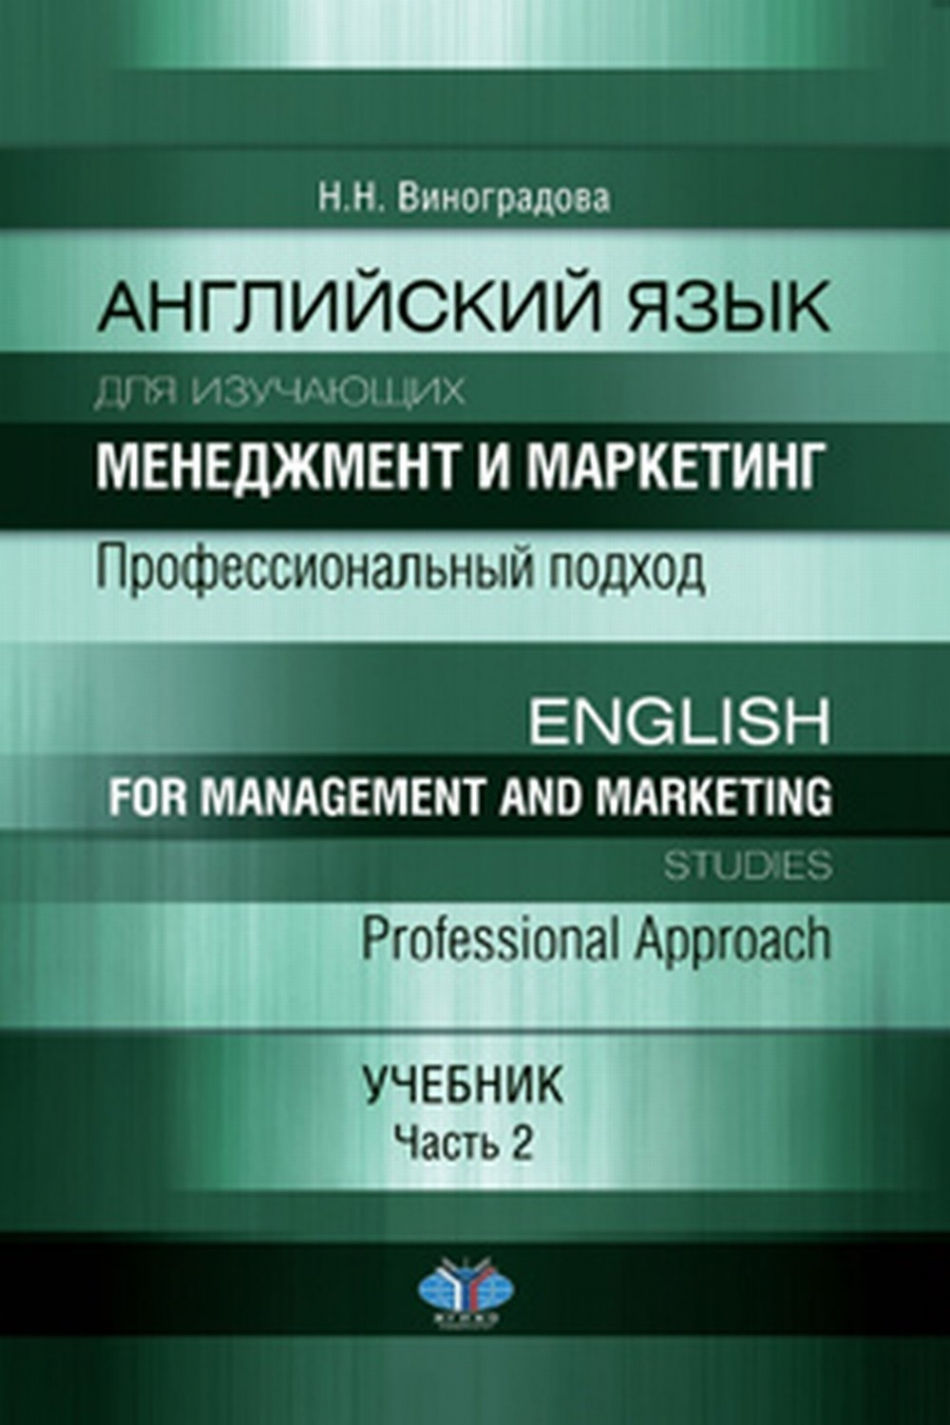  ..       :   / English for Management and Marketing Studies: Professional Approach.  1 